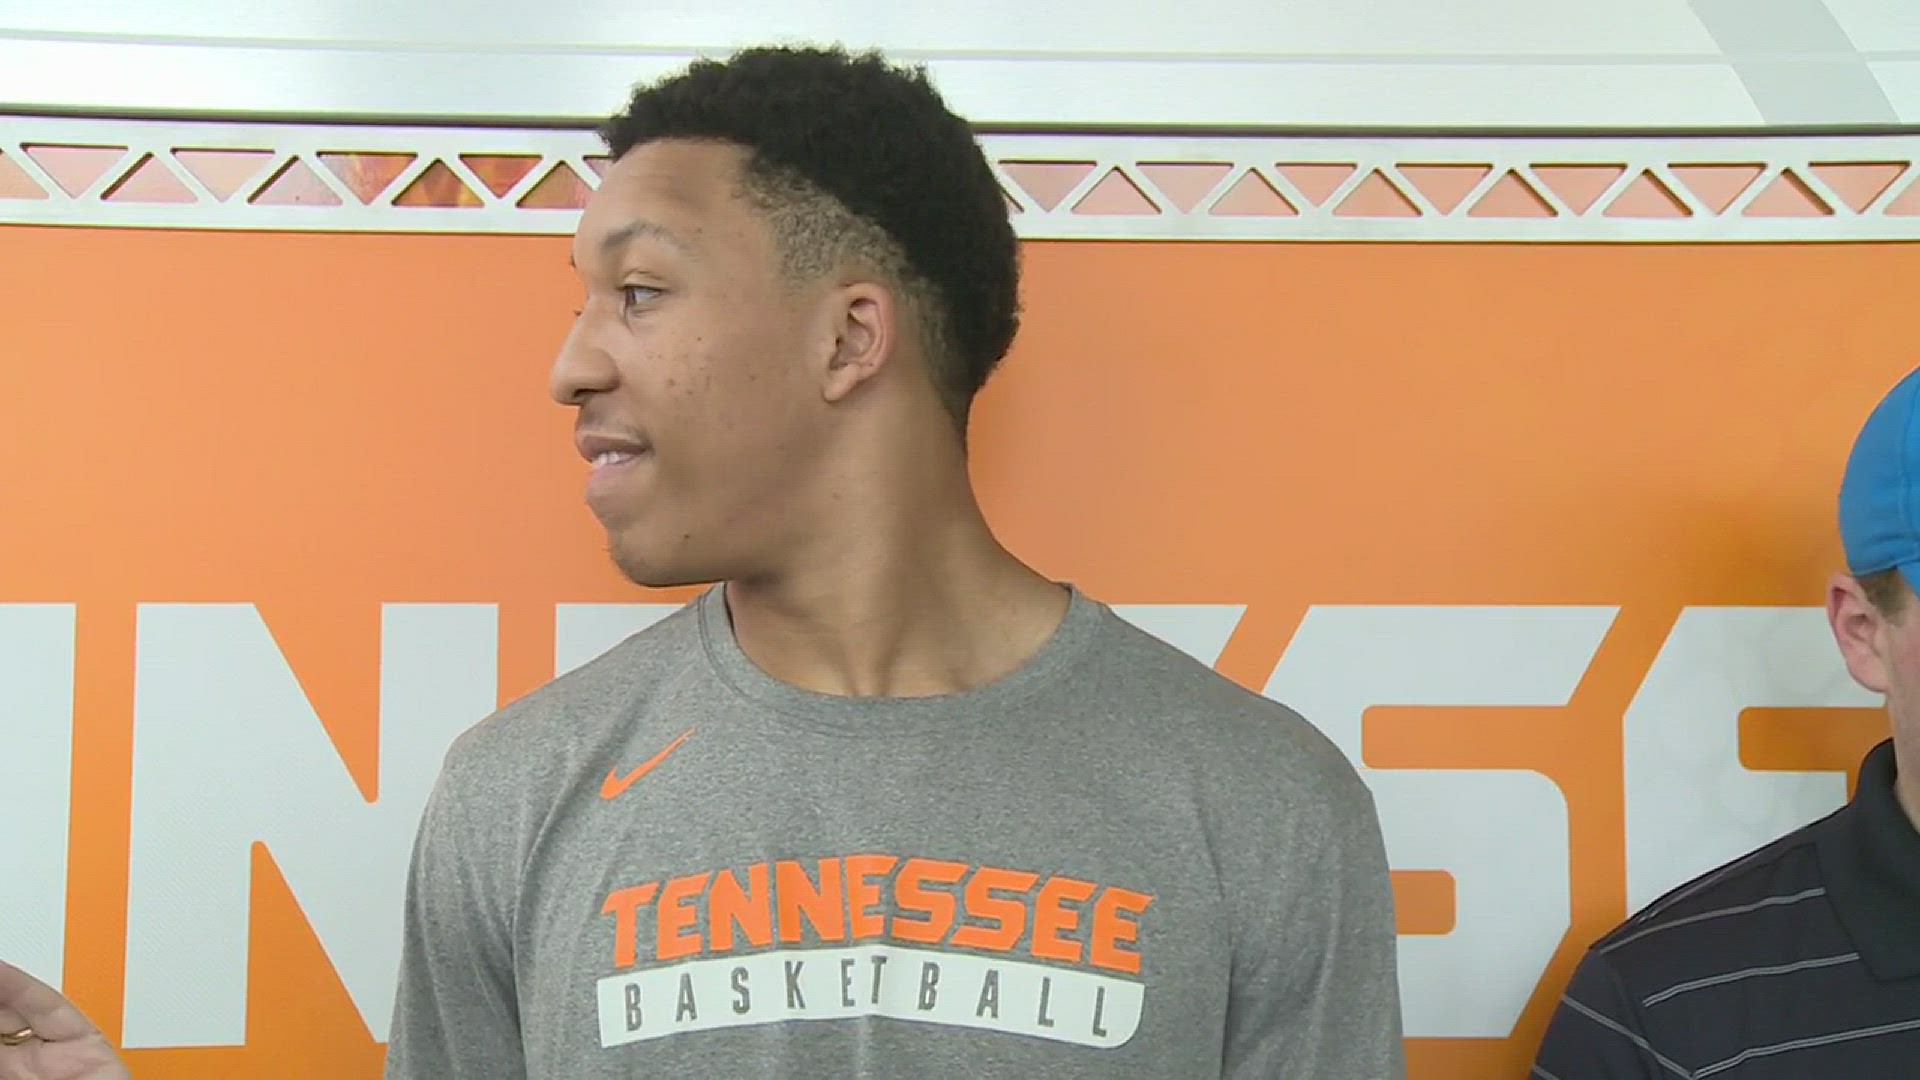 Tennessee basketball head coach Rick Barnes interrupts a press conference to ask Grant Williams a question.